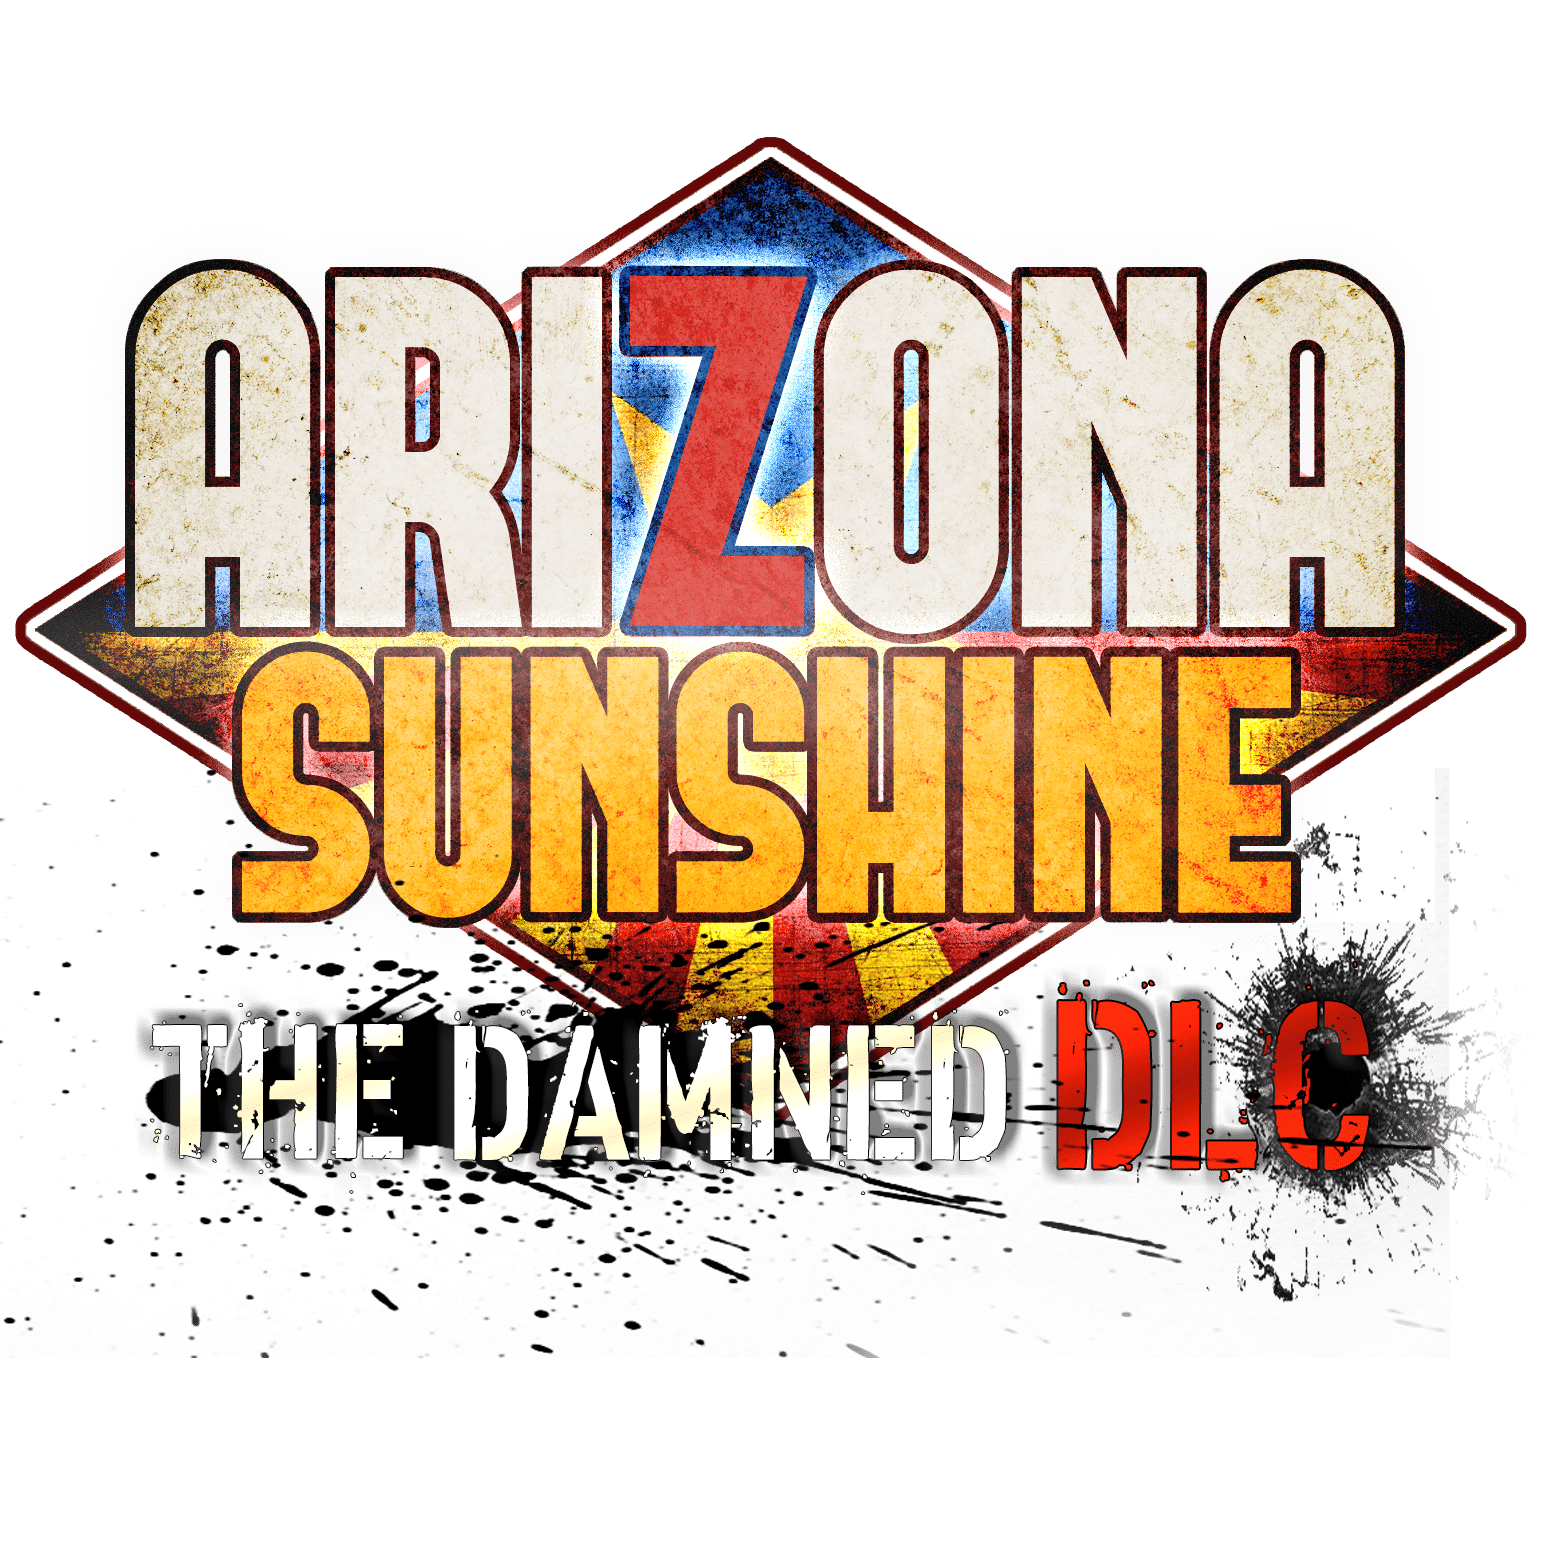 Arizona Sunshine The Damned DLC in arrivo per PlayStation 4, Oculus Rift, HTC Vive e le cuffie Windows Mixed Reality